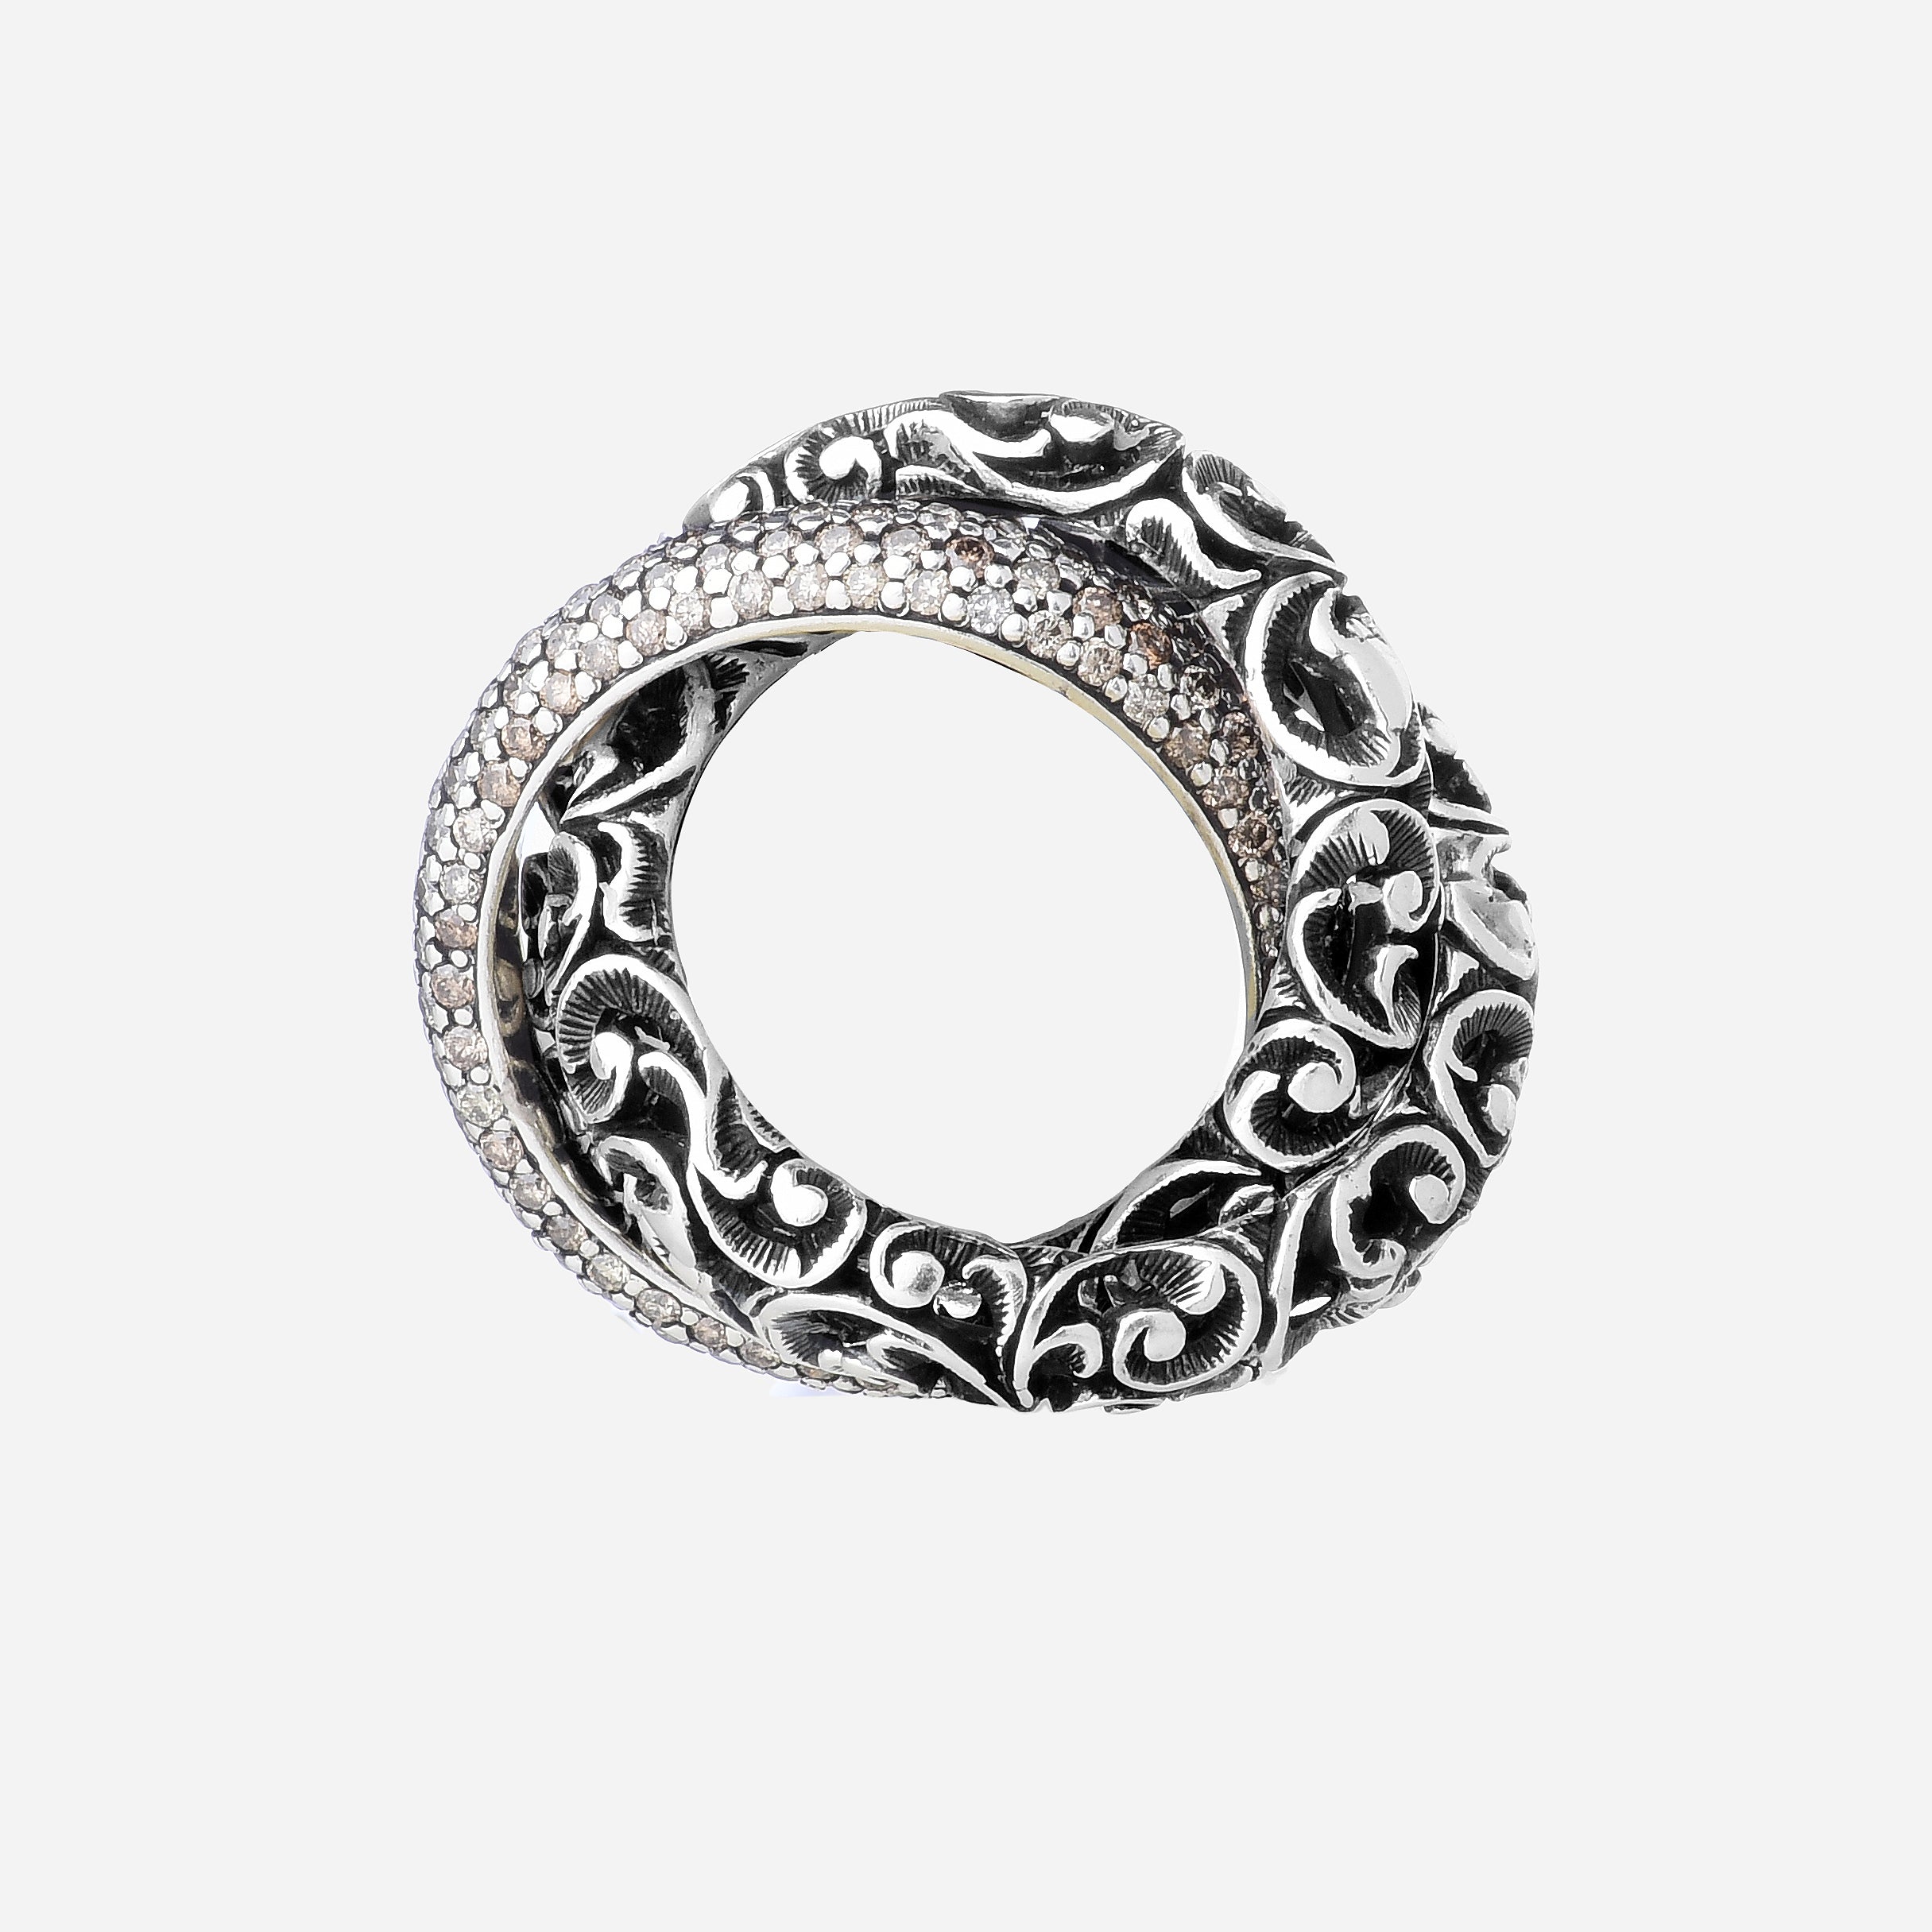 Intertwined wedding ring with diamonds